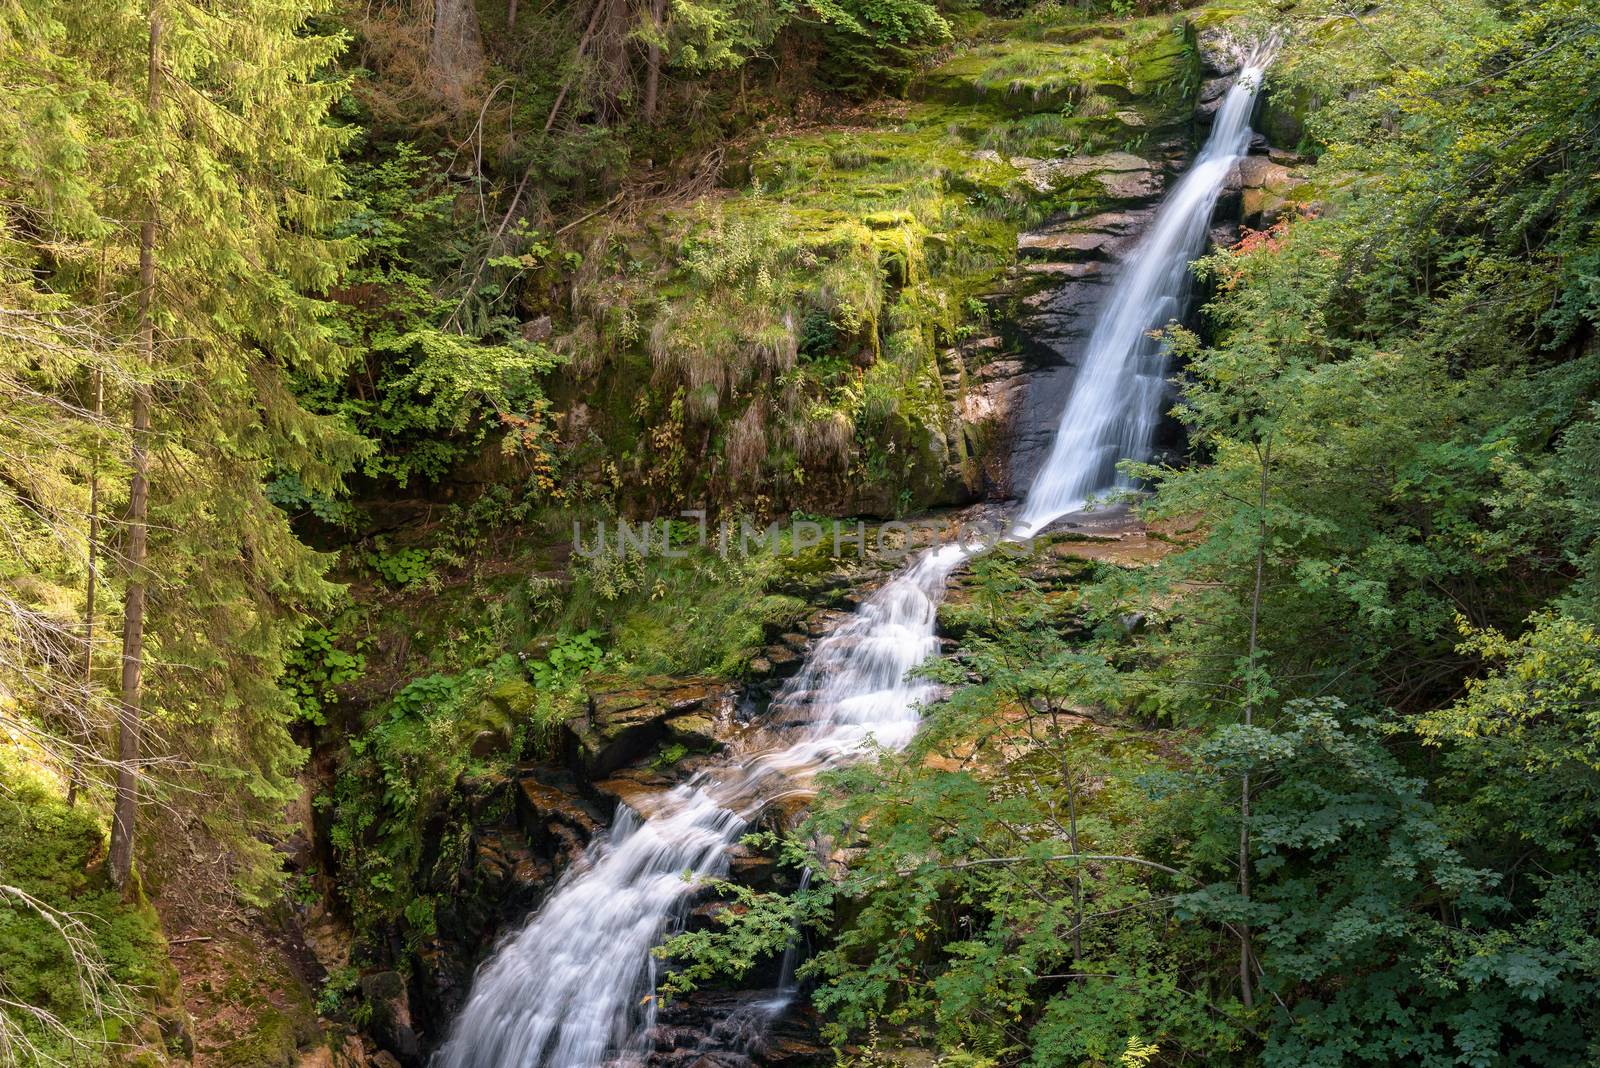 Blurred water of waterfall of Kamienczyk river - the highest waterfall in polish Giant Mountains